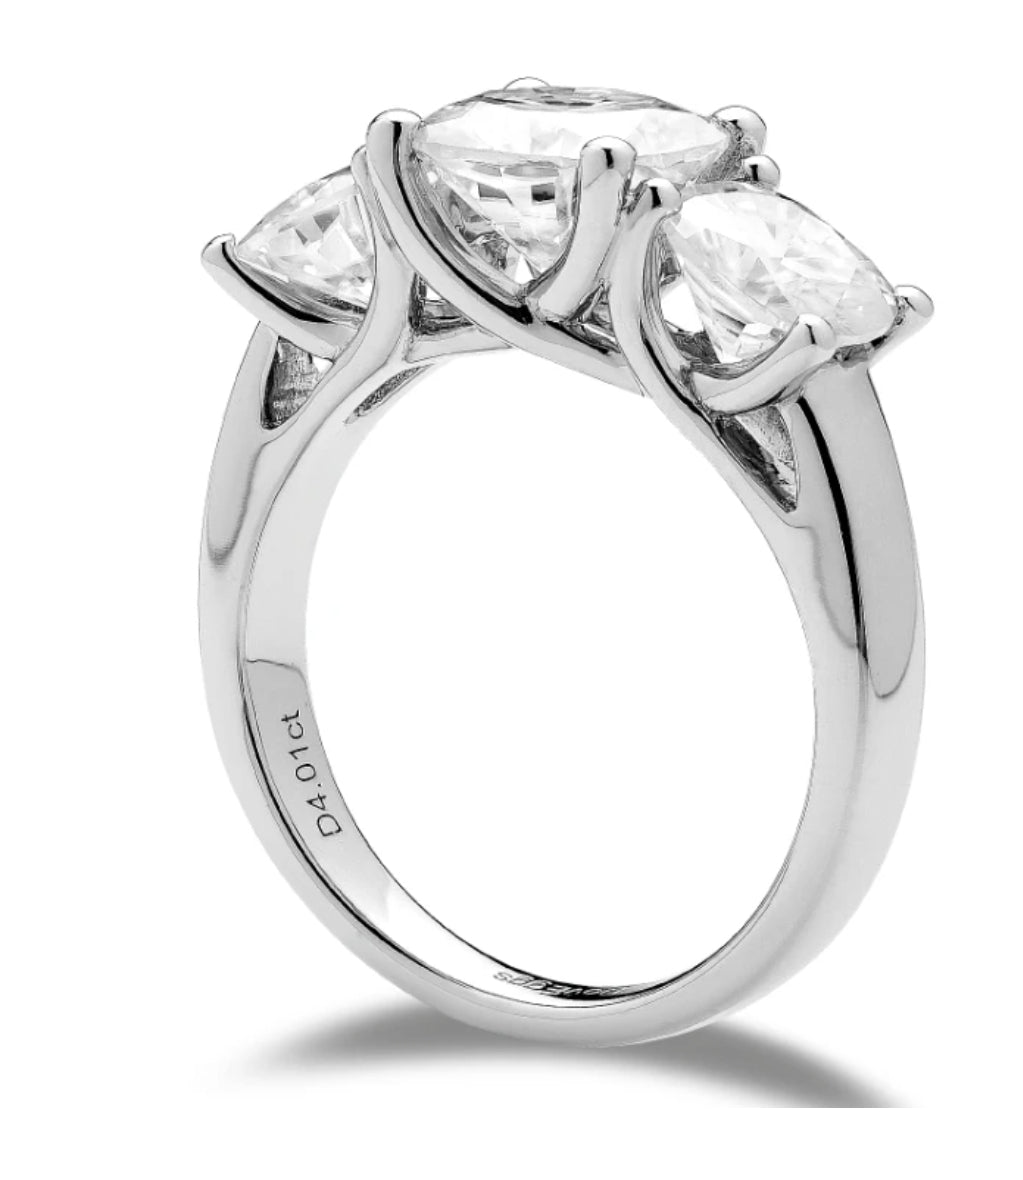 Bemyringsister 3 stone(1ct-1.5ct-1ct) cushion moissanite ring solid 10k white gold